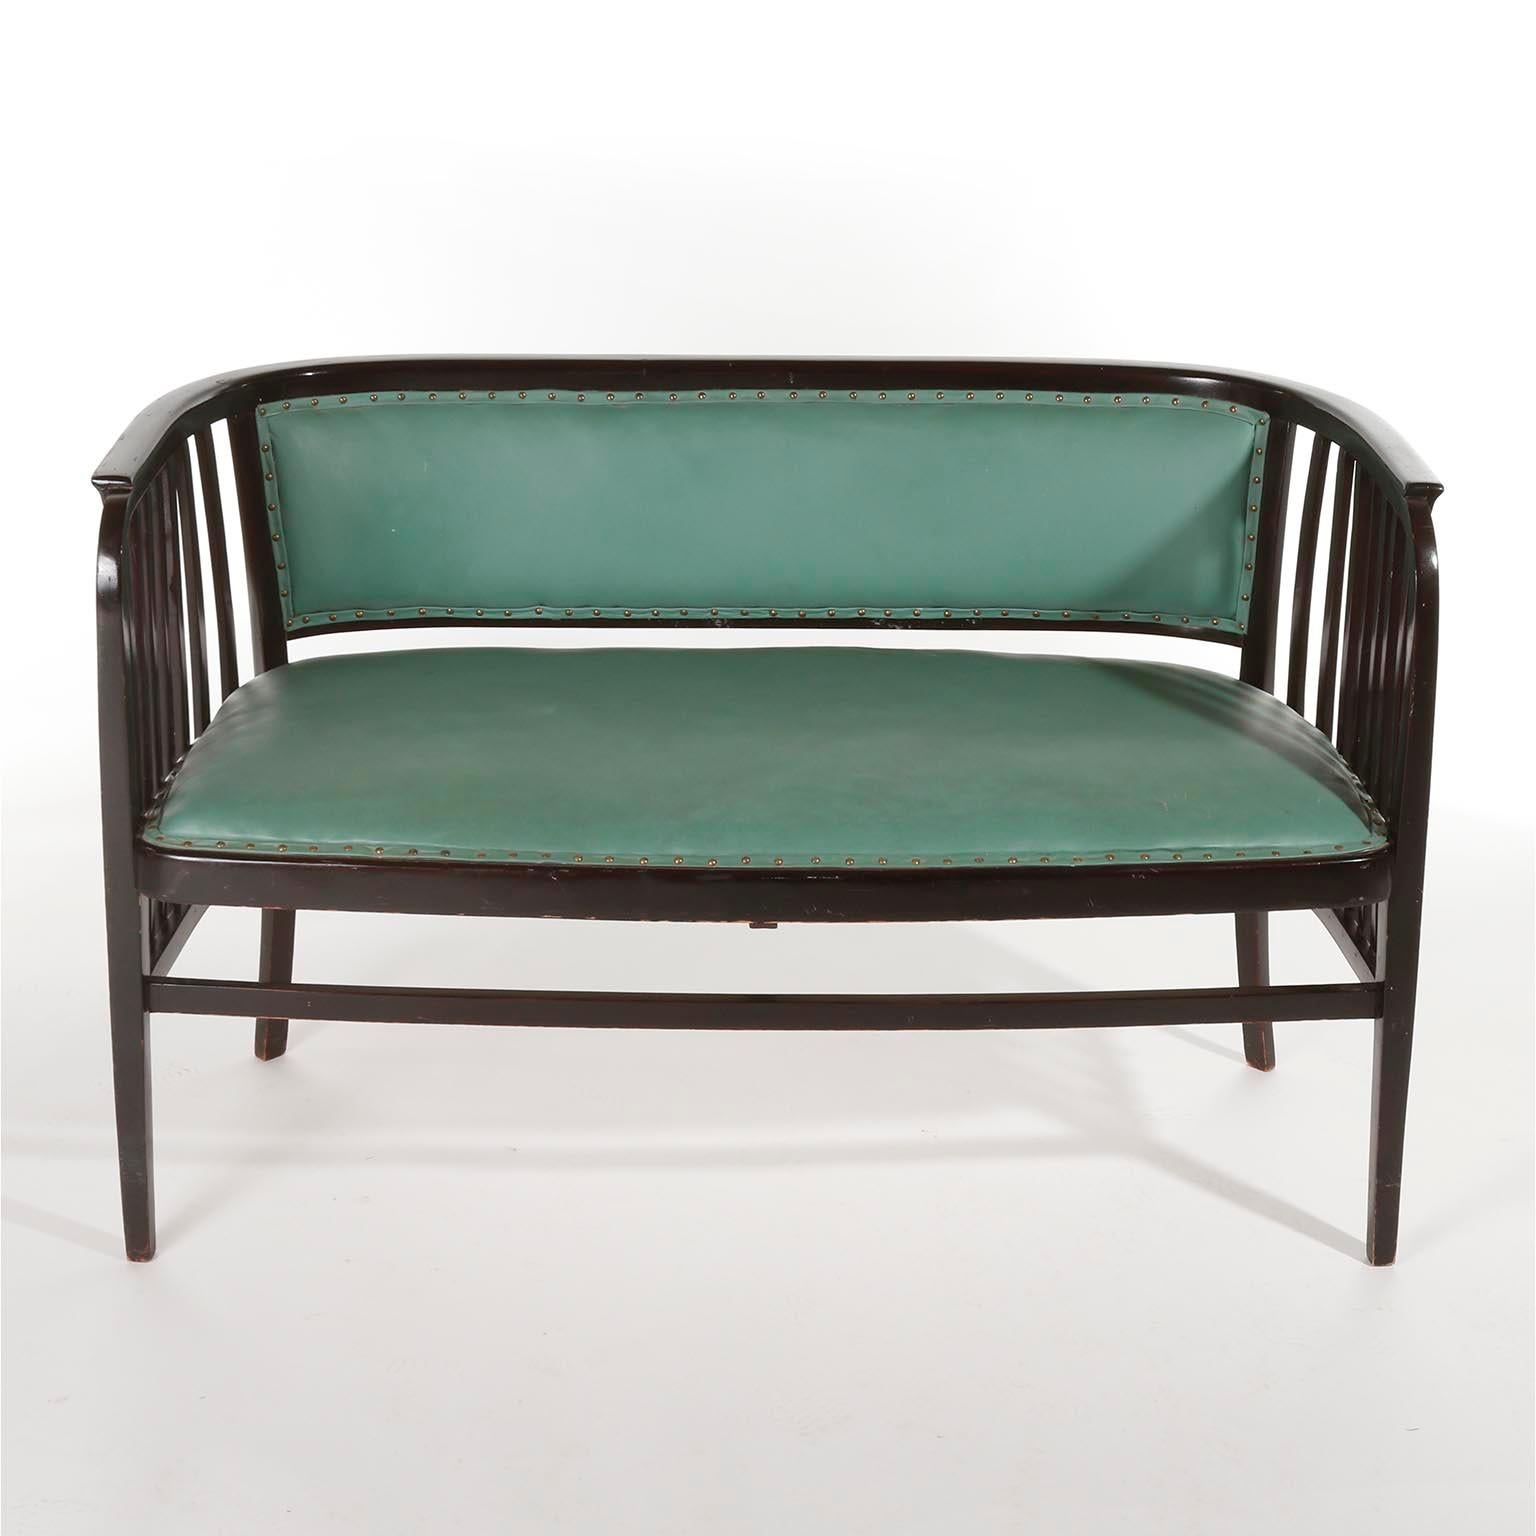 Pair of Armchairs Chairs Marcel Kammerer, Thonet, Turquoise Green Leather, 1910 For Sale 1